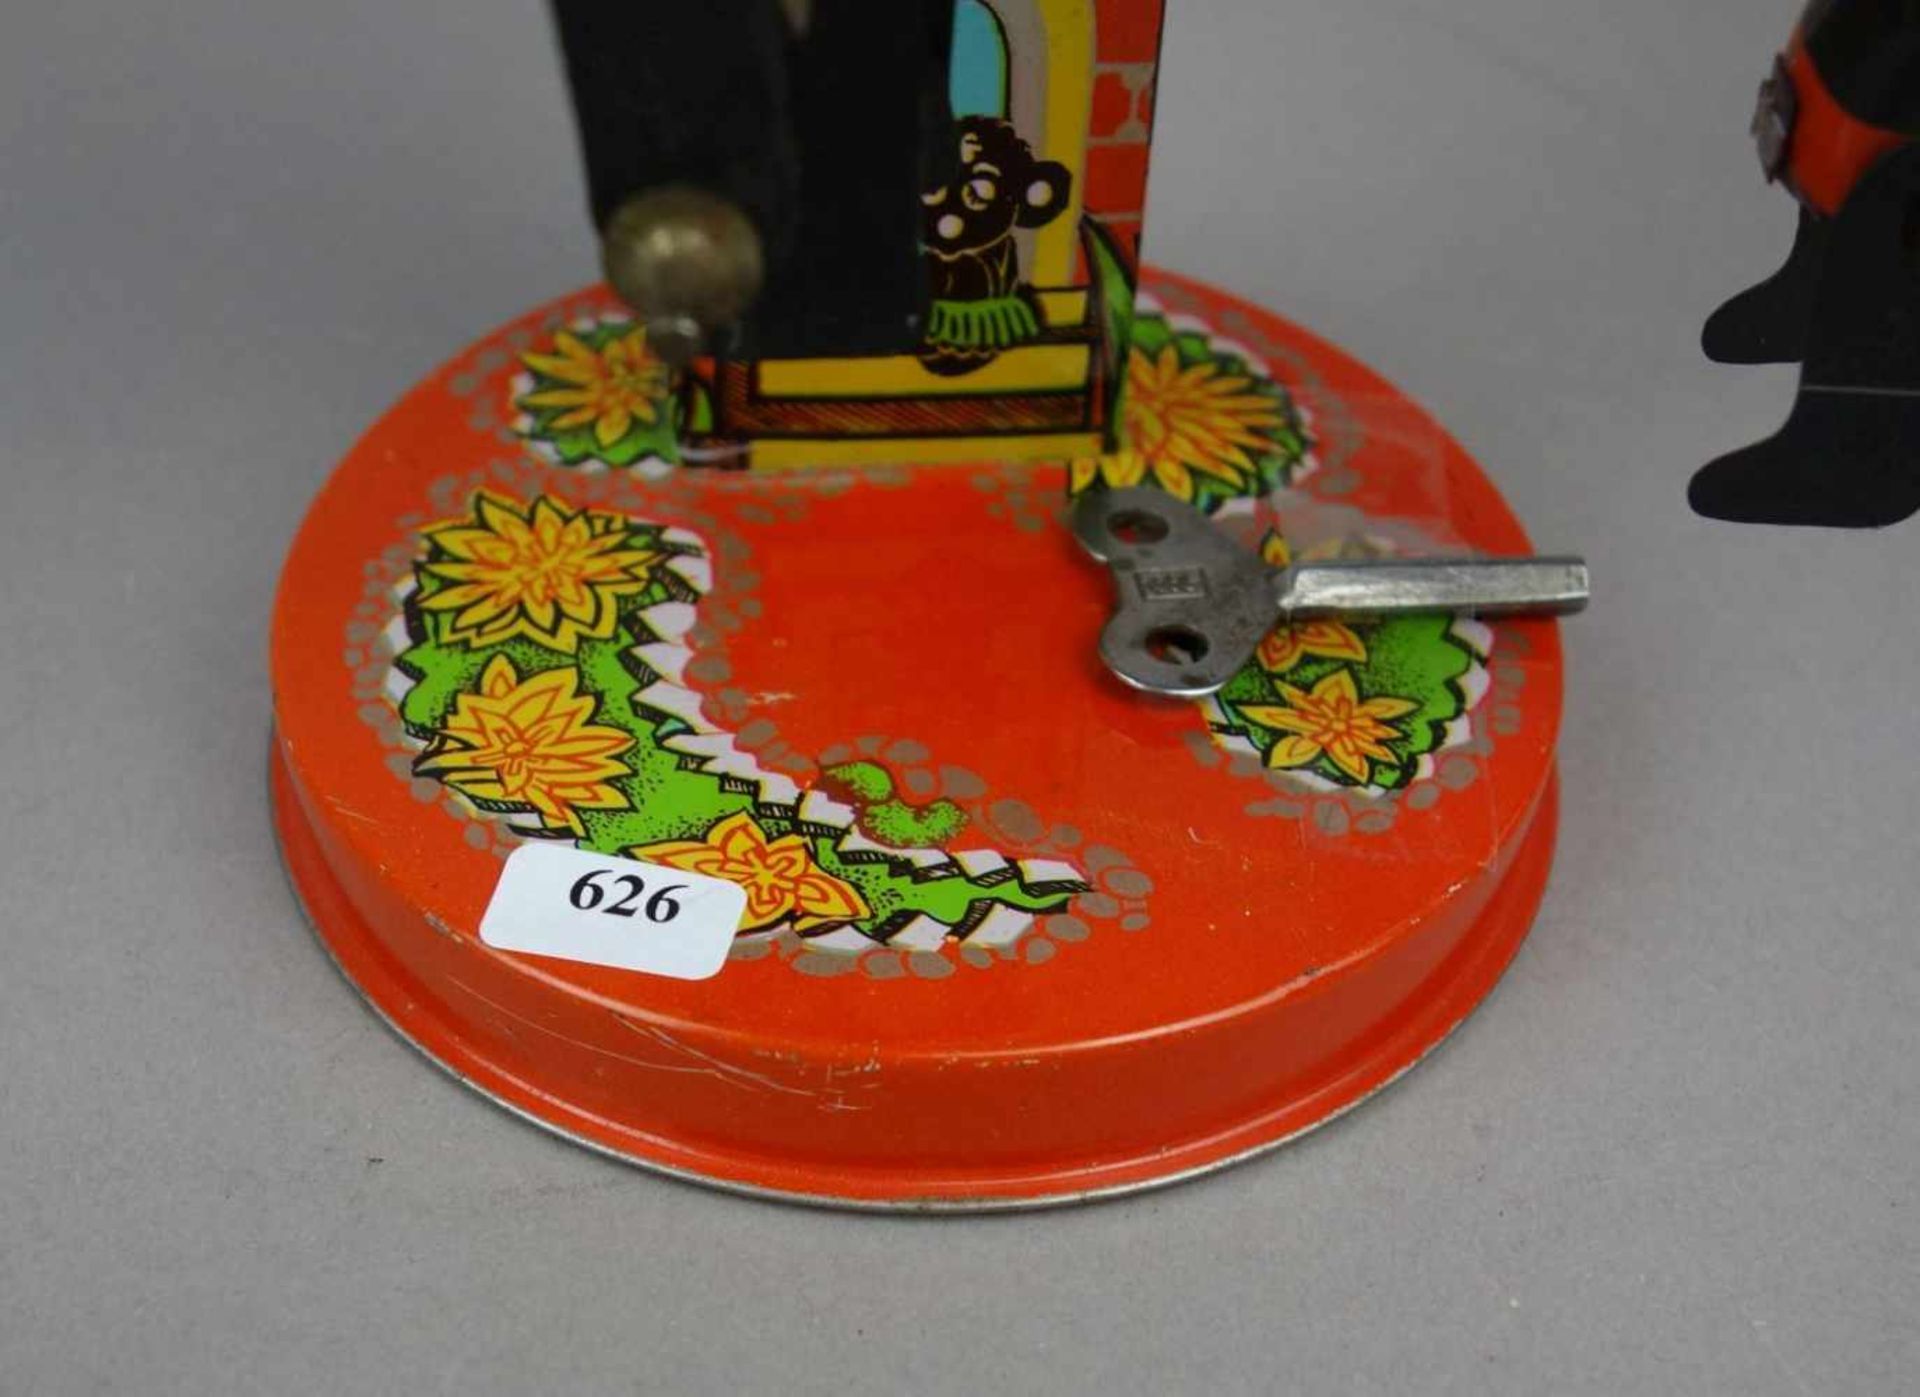 BLECHSPIELZEUG: Karussell / "Affenschaukel" / tin toy carousel with apes, Blech, polychrom - Image 2 of 7